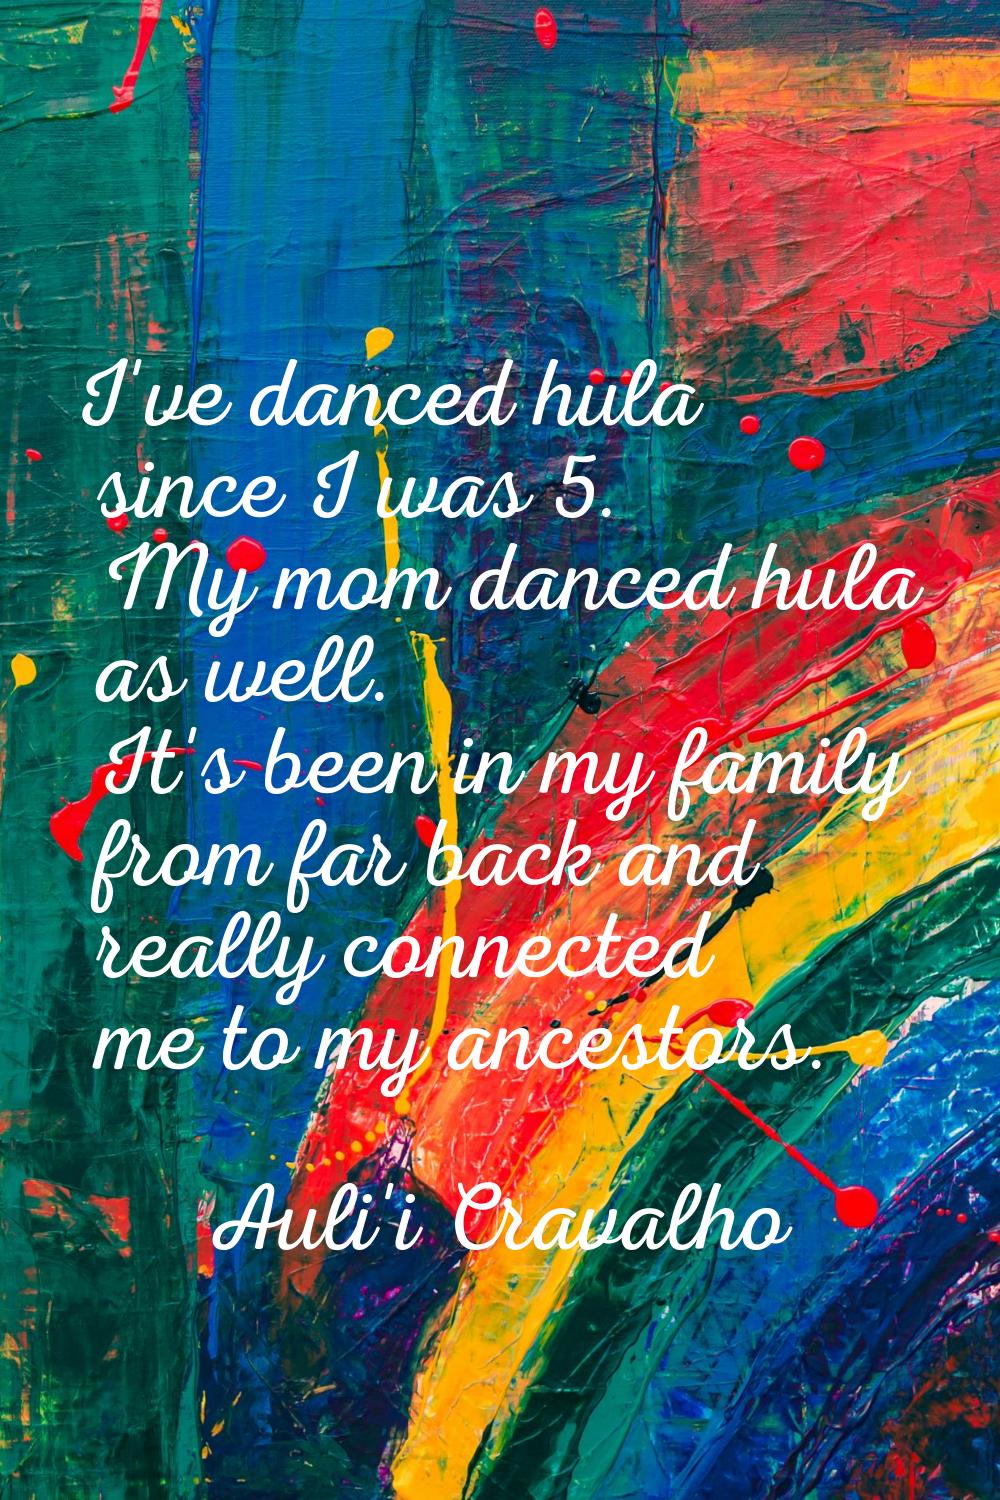 I've danced hula since I was 5. My mom danced hula as well. It's been in my family from far back an